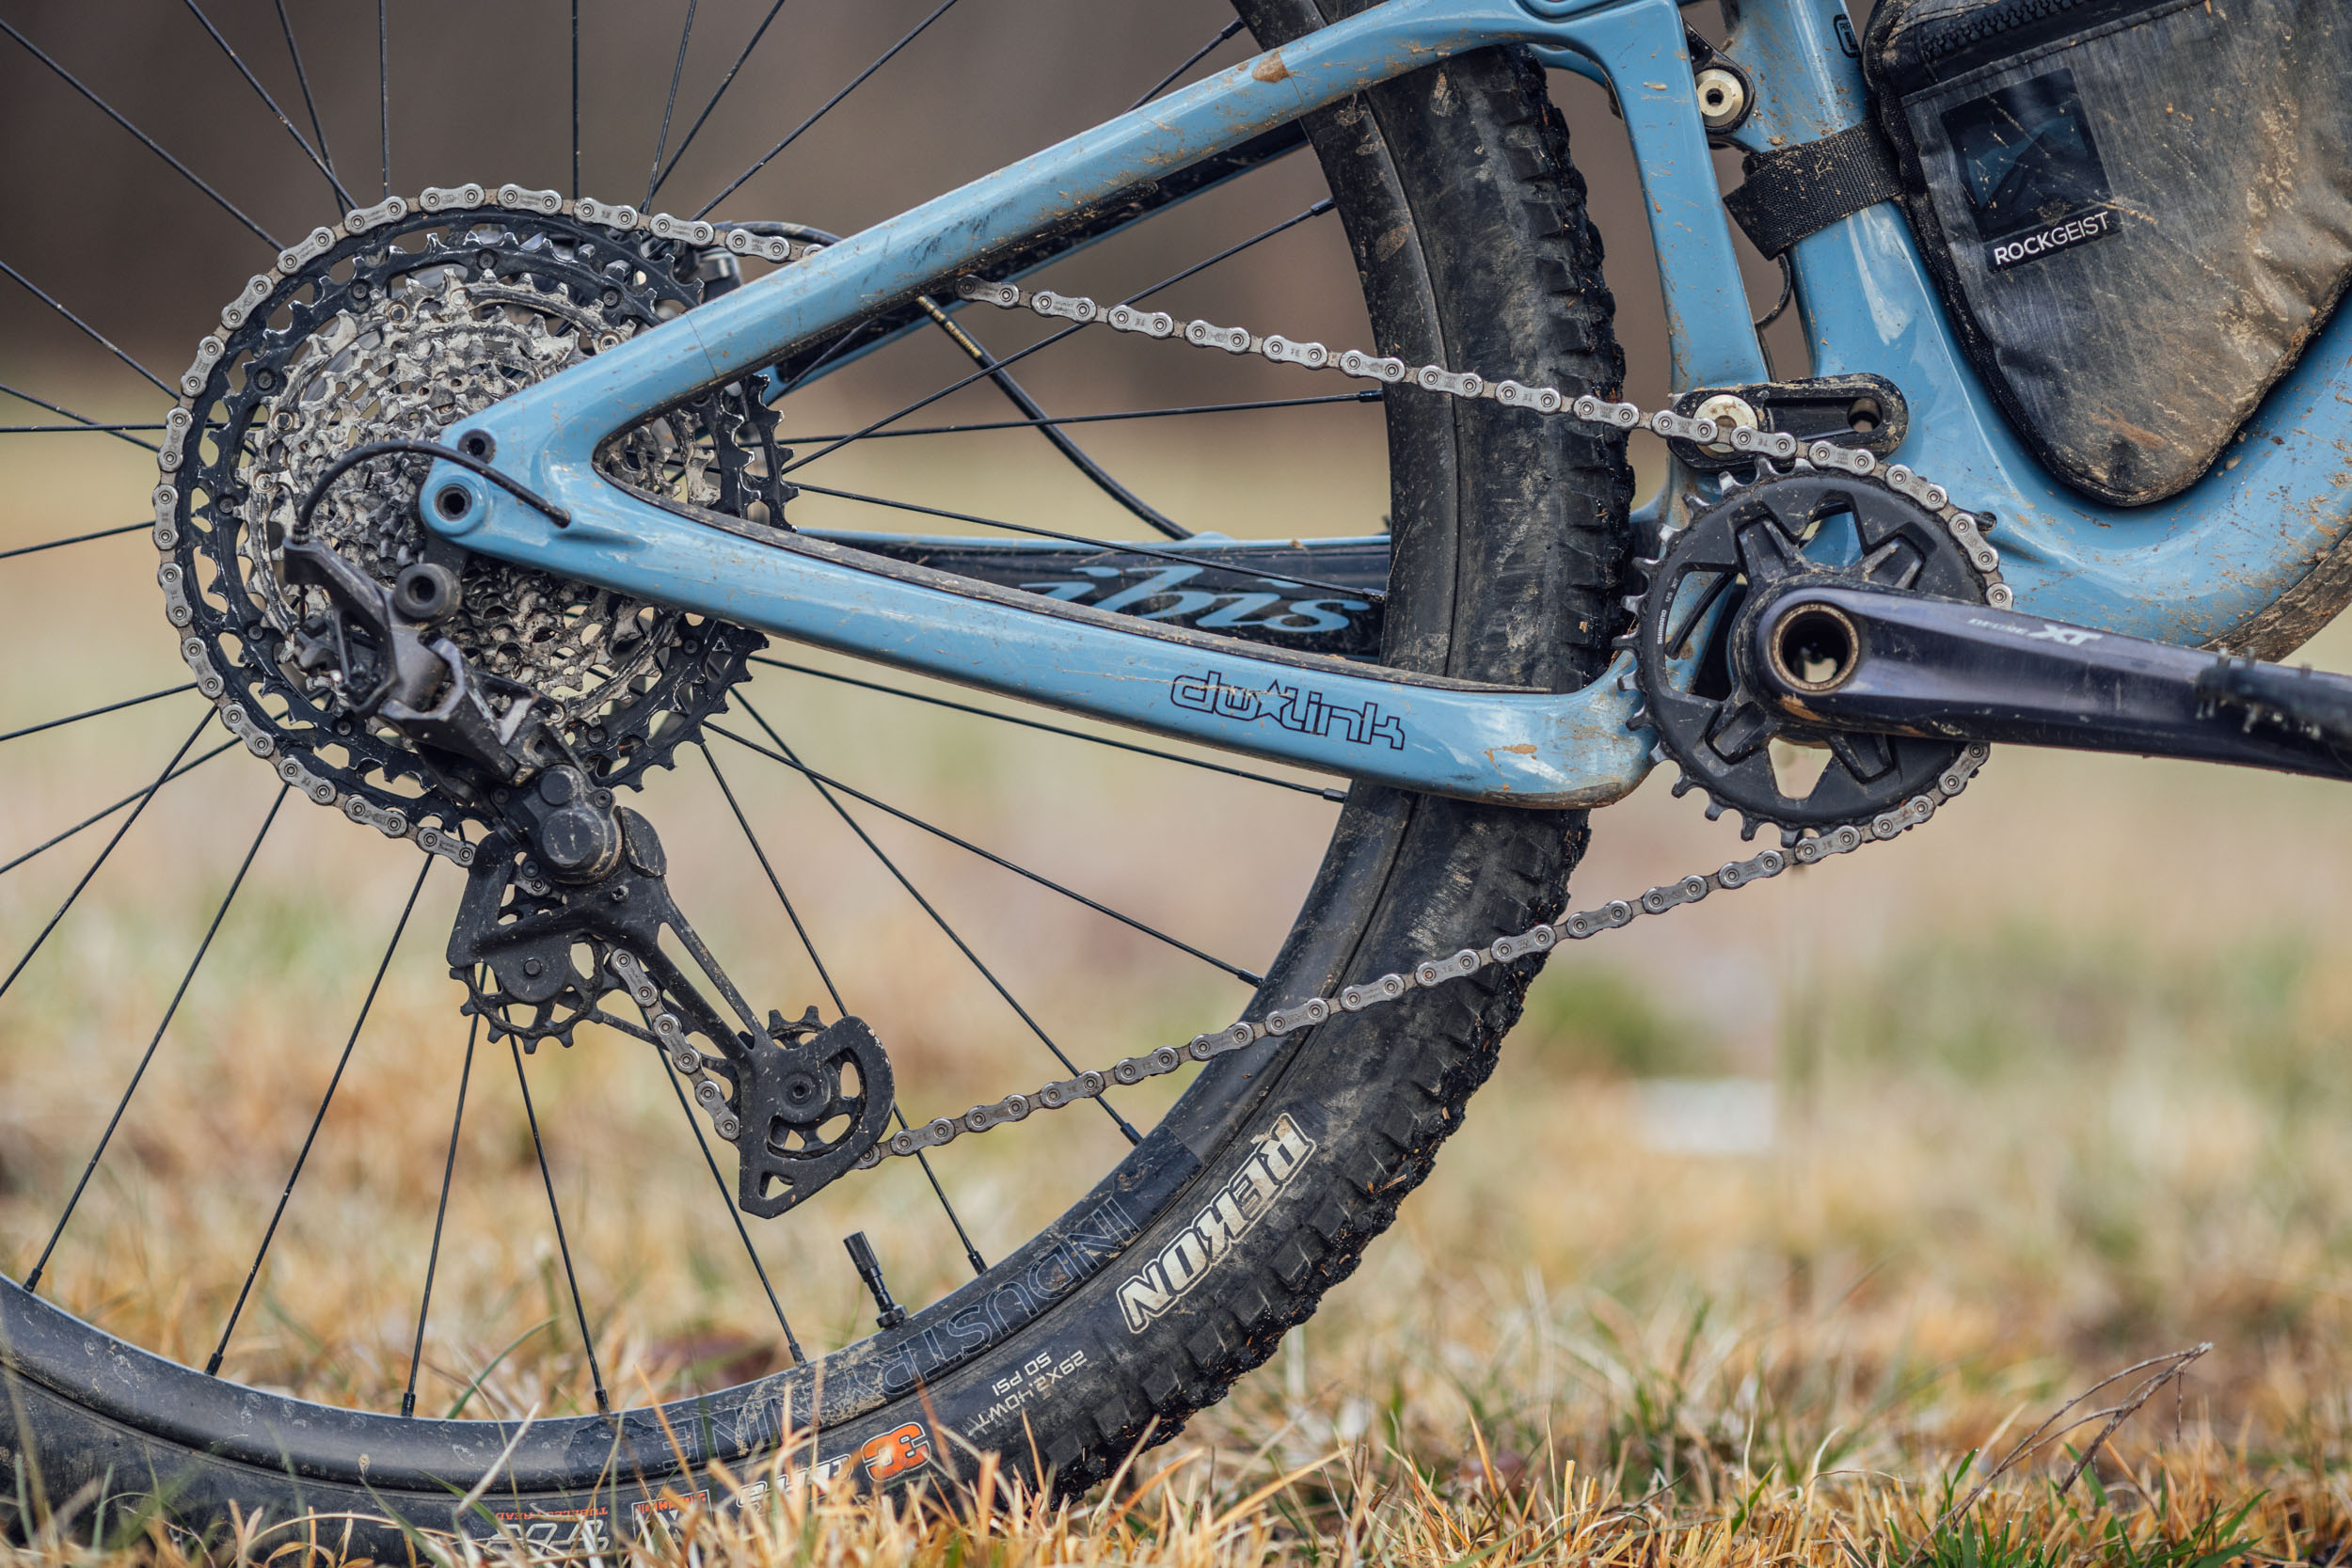 12-Speed Shimano XT Review: Lessons After 2,500 Miles